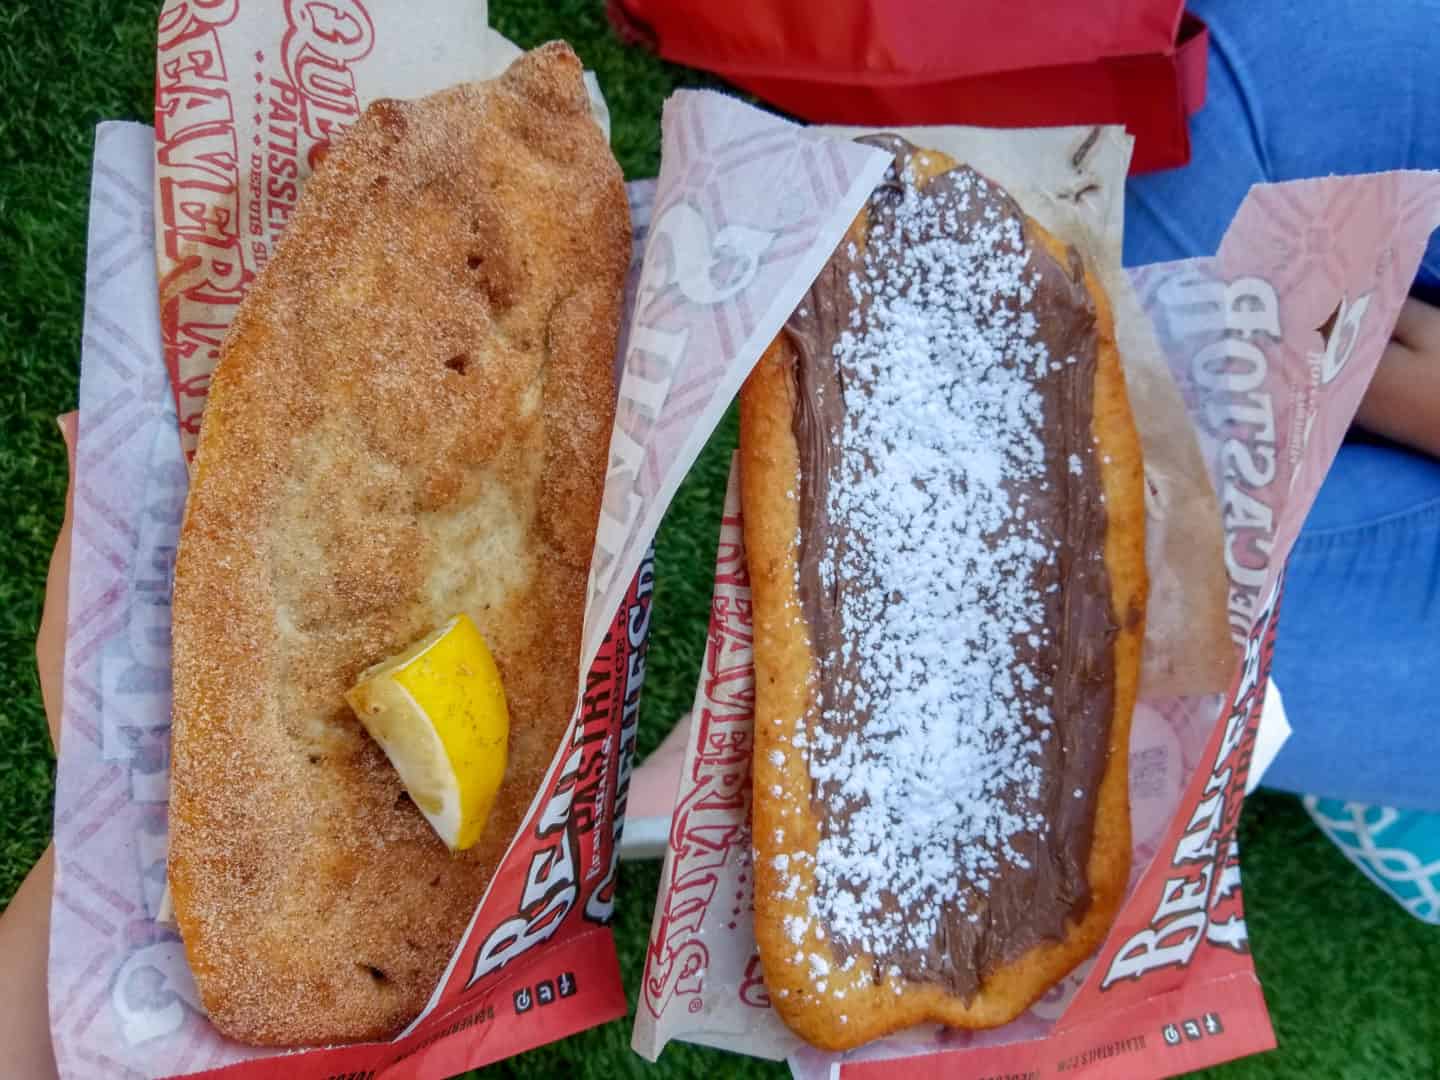 Beaver Tails is one of the traditional Canadian foods you have to try